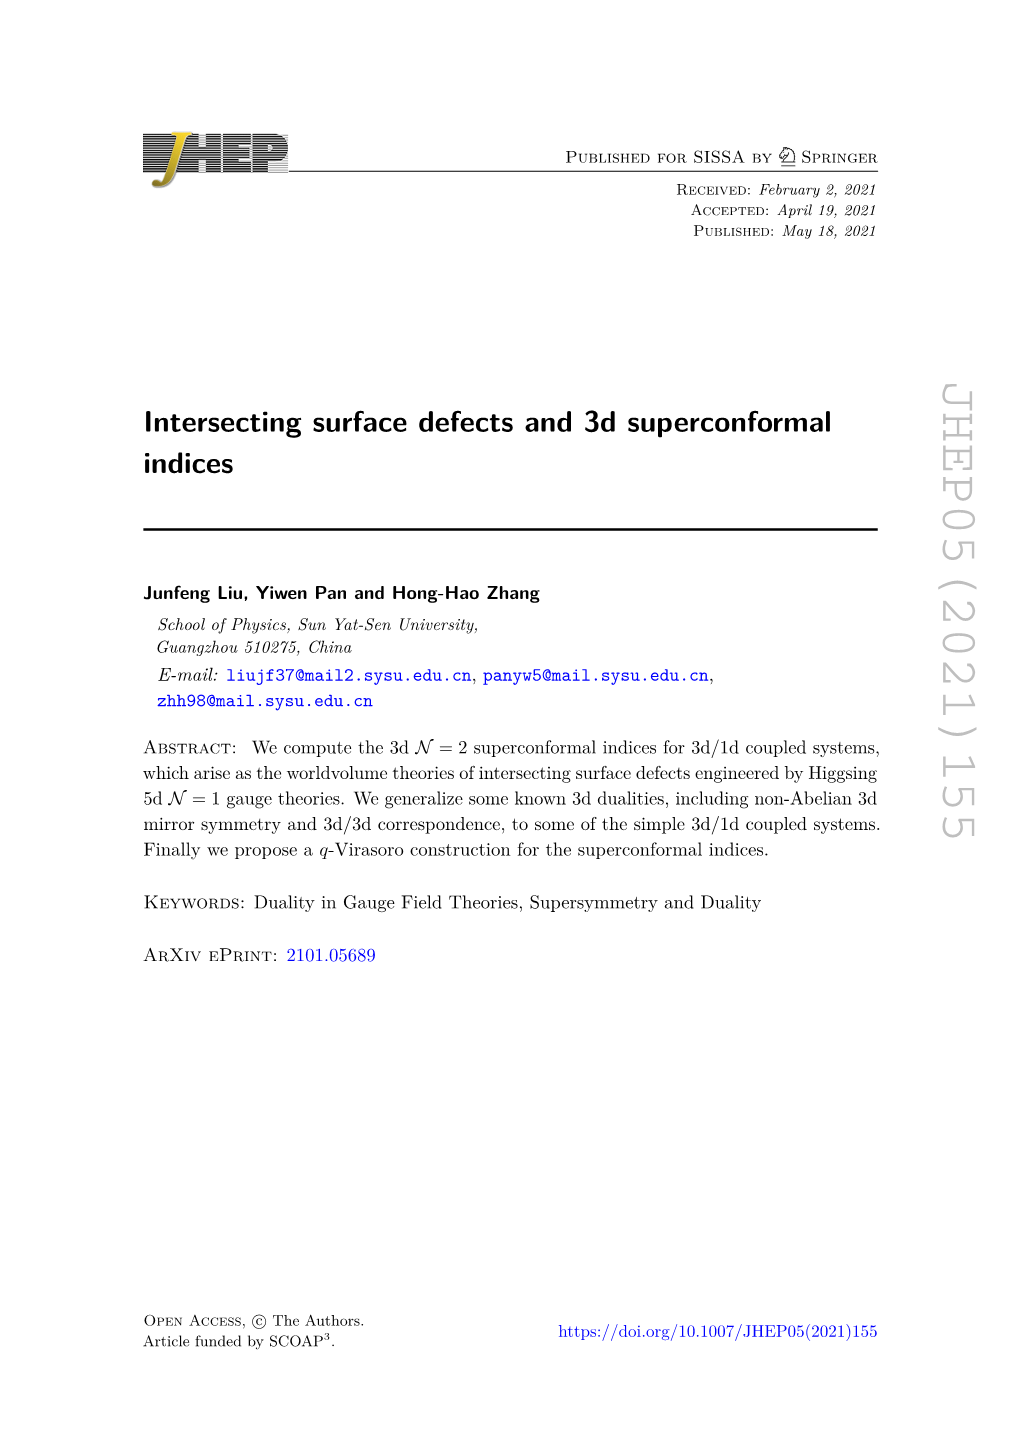 Intersecting Surface Defects and 3D Superconformal Indices